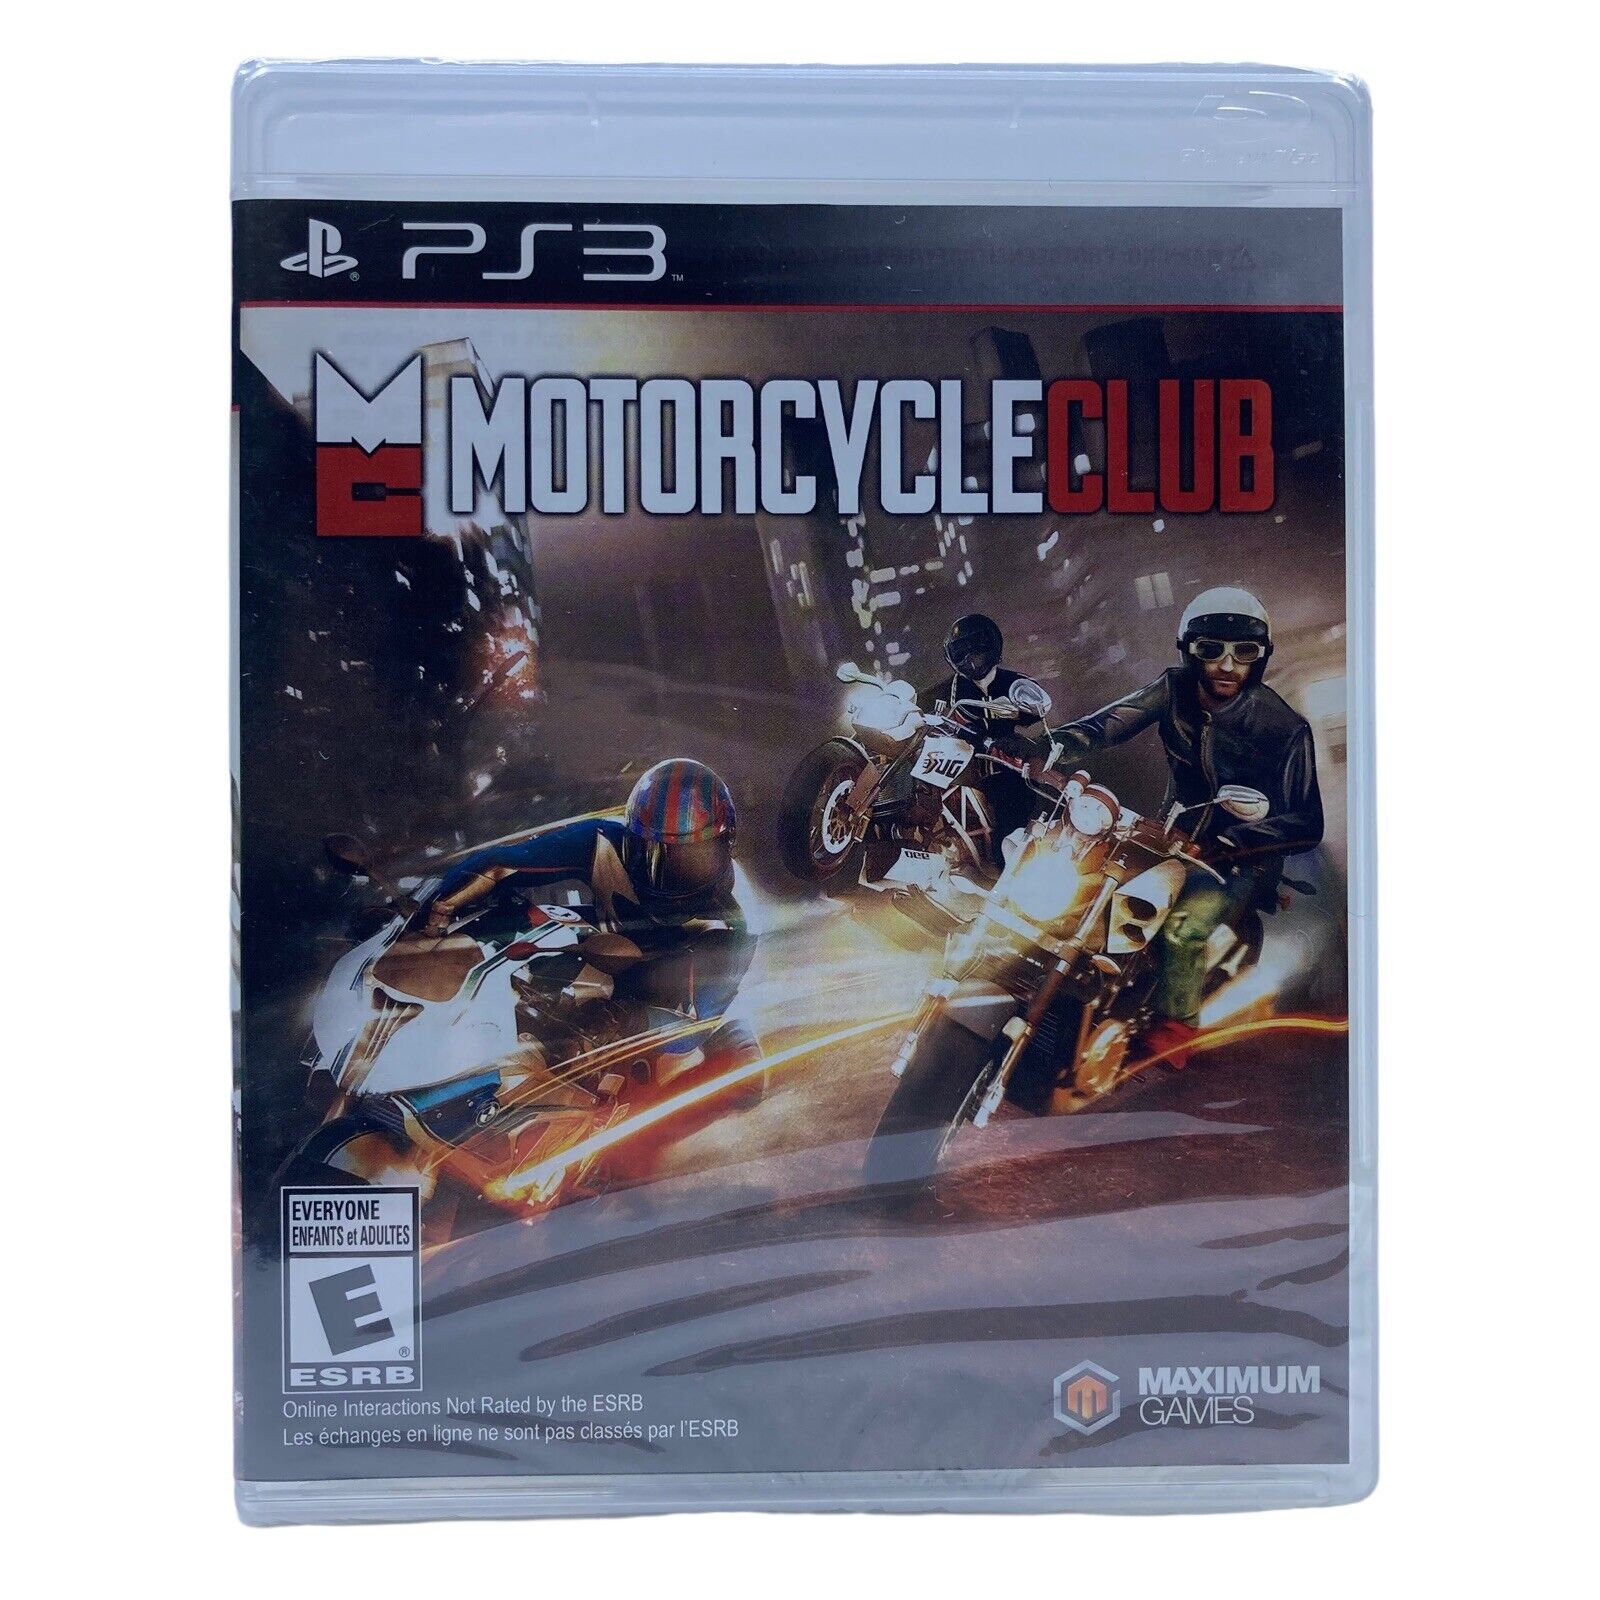 Motorcycle Club (Sony PlayStation 3, 2015) PS3 Brand New Factory Sealed  814290012892 | eBay